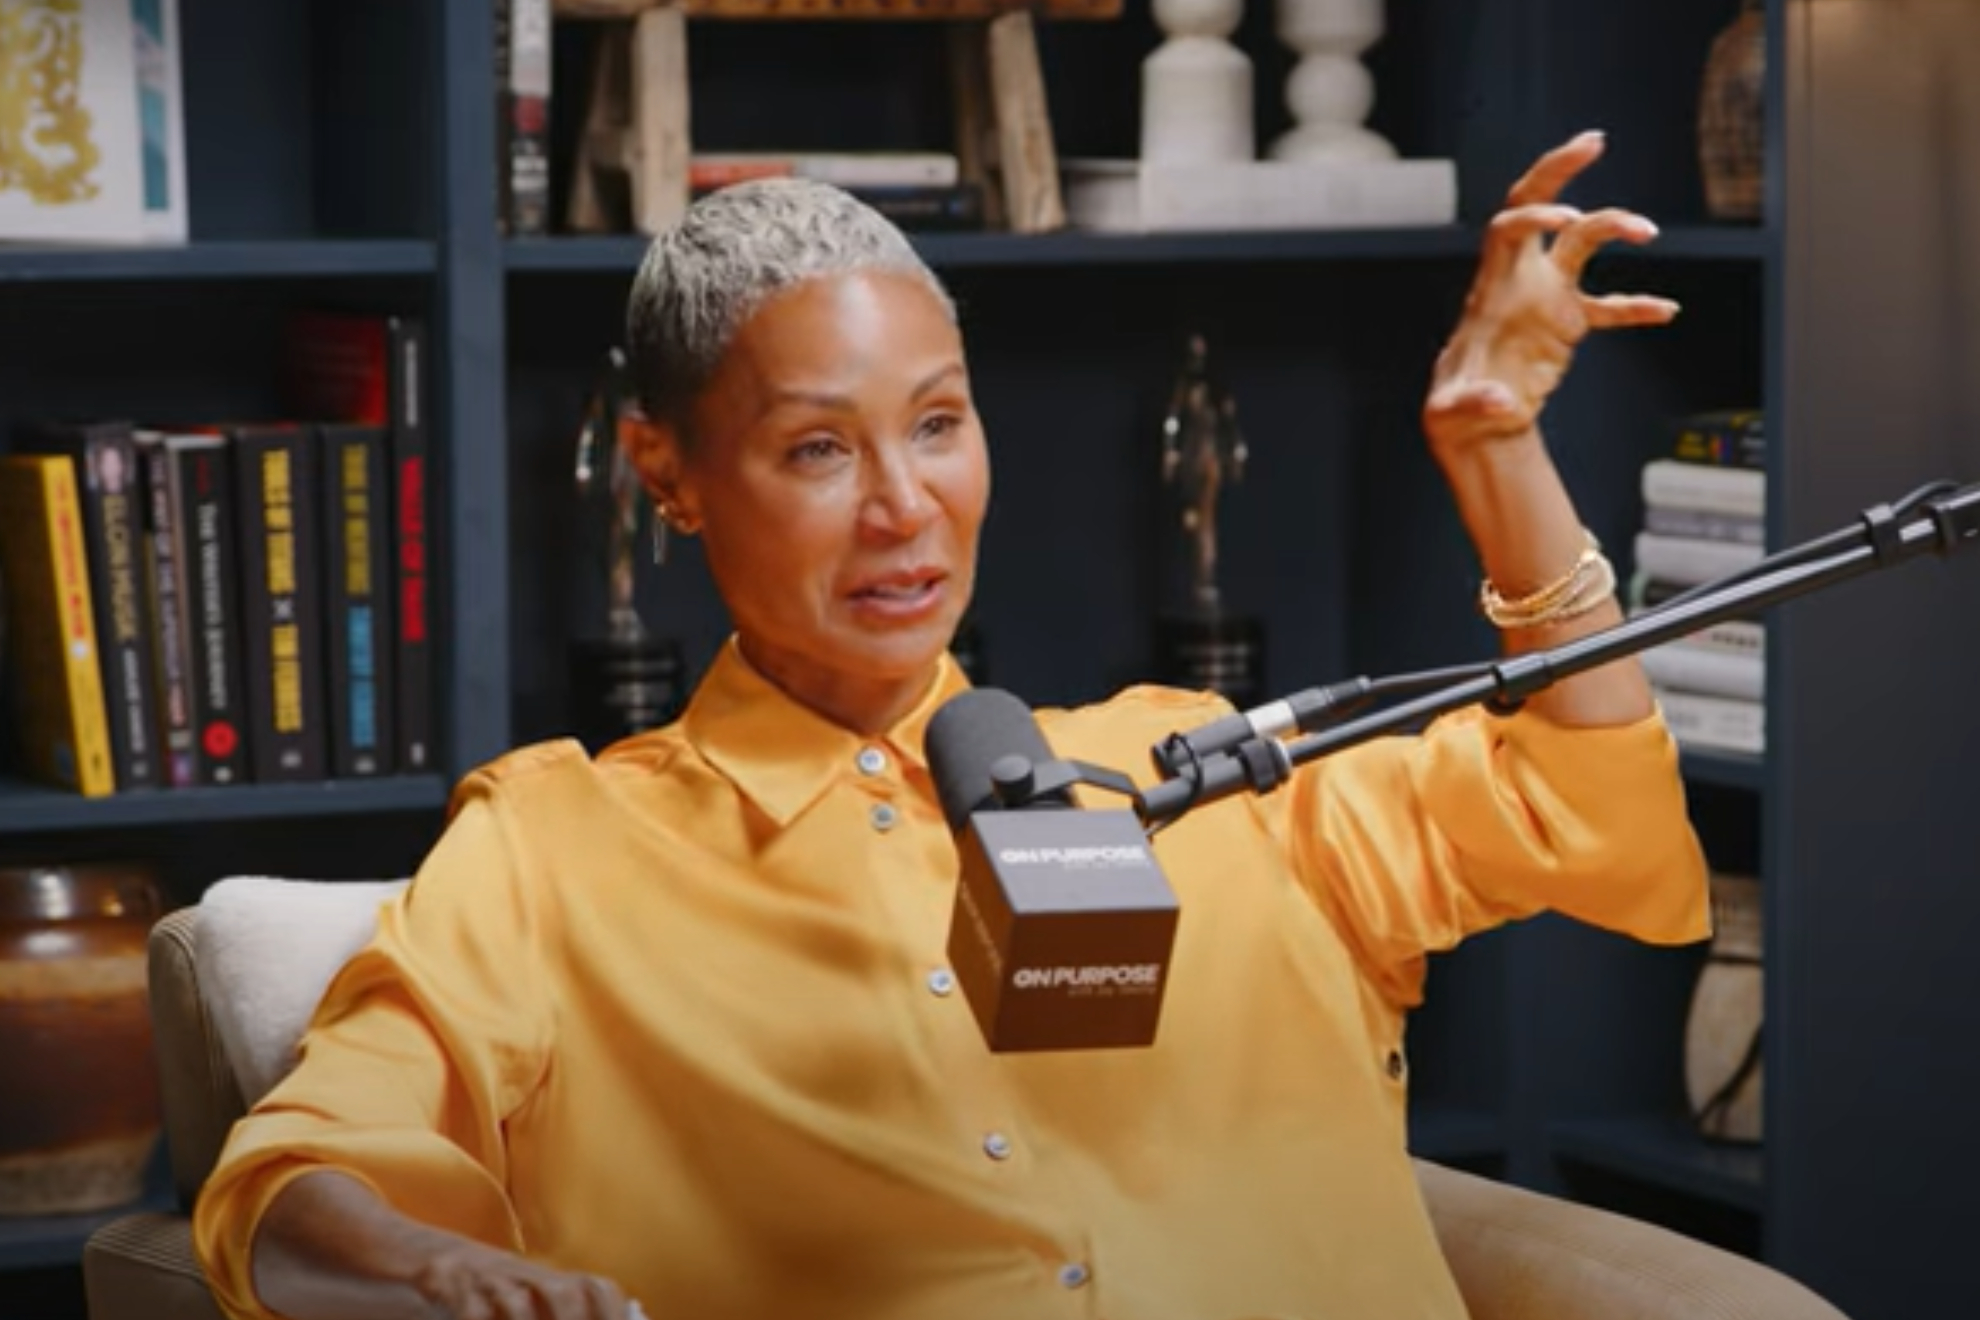 Jada Pinkett Smith opens up about her physical chemistry and intimacy with Tupac